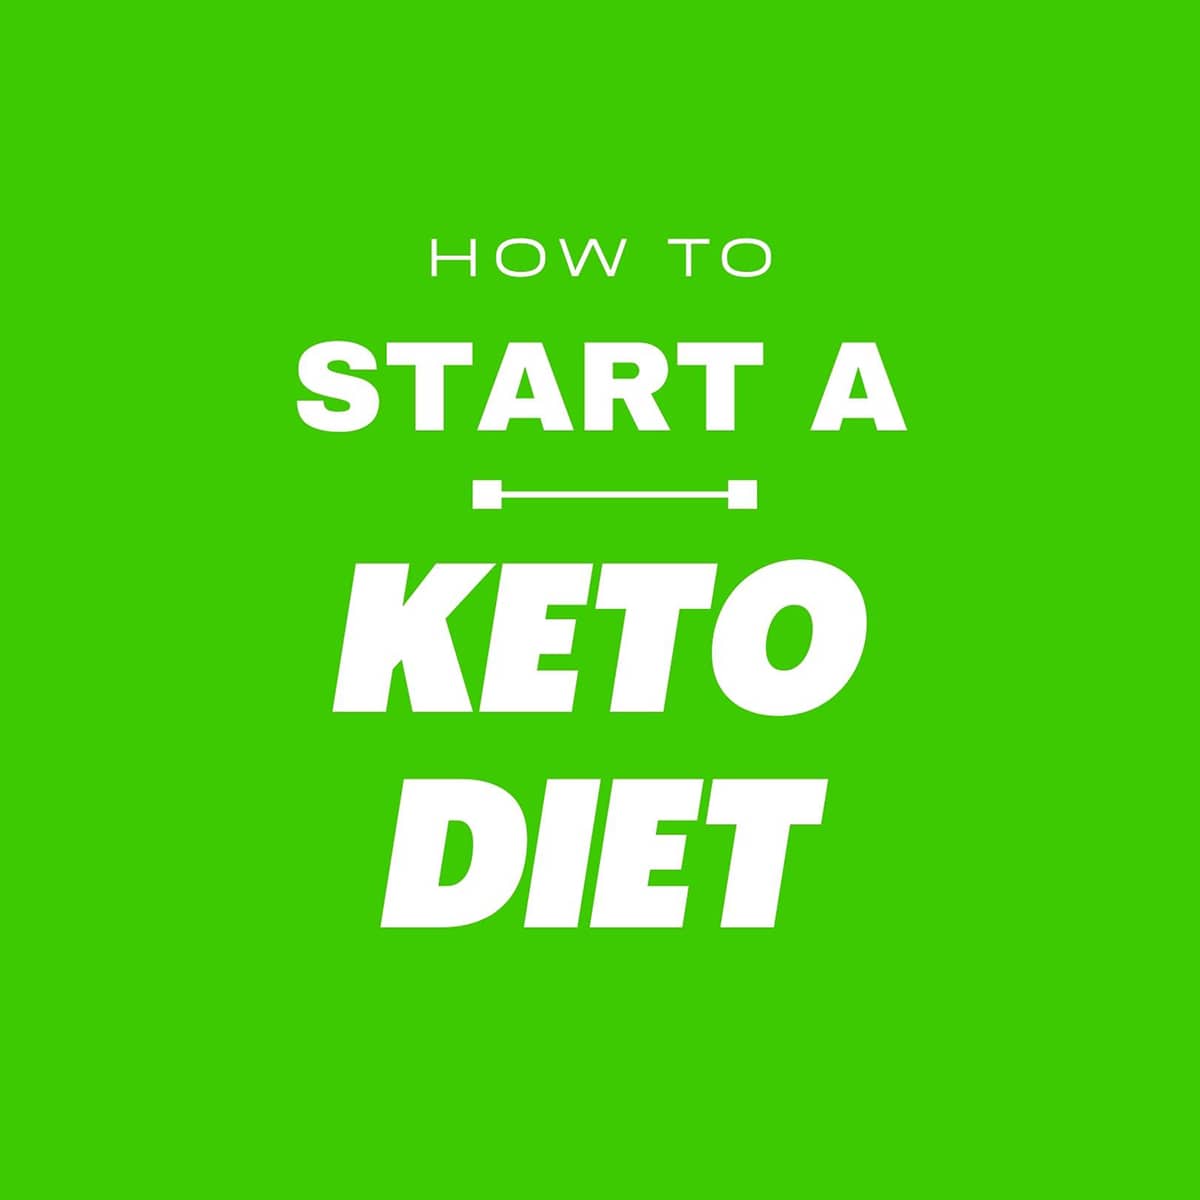 How to start a keto diet.